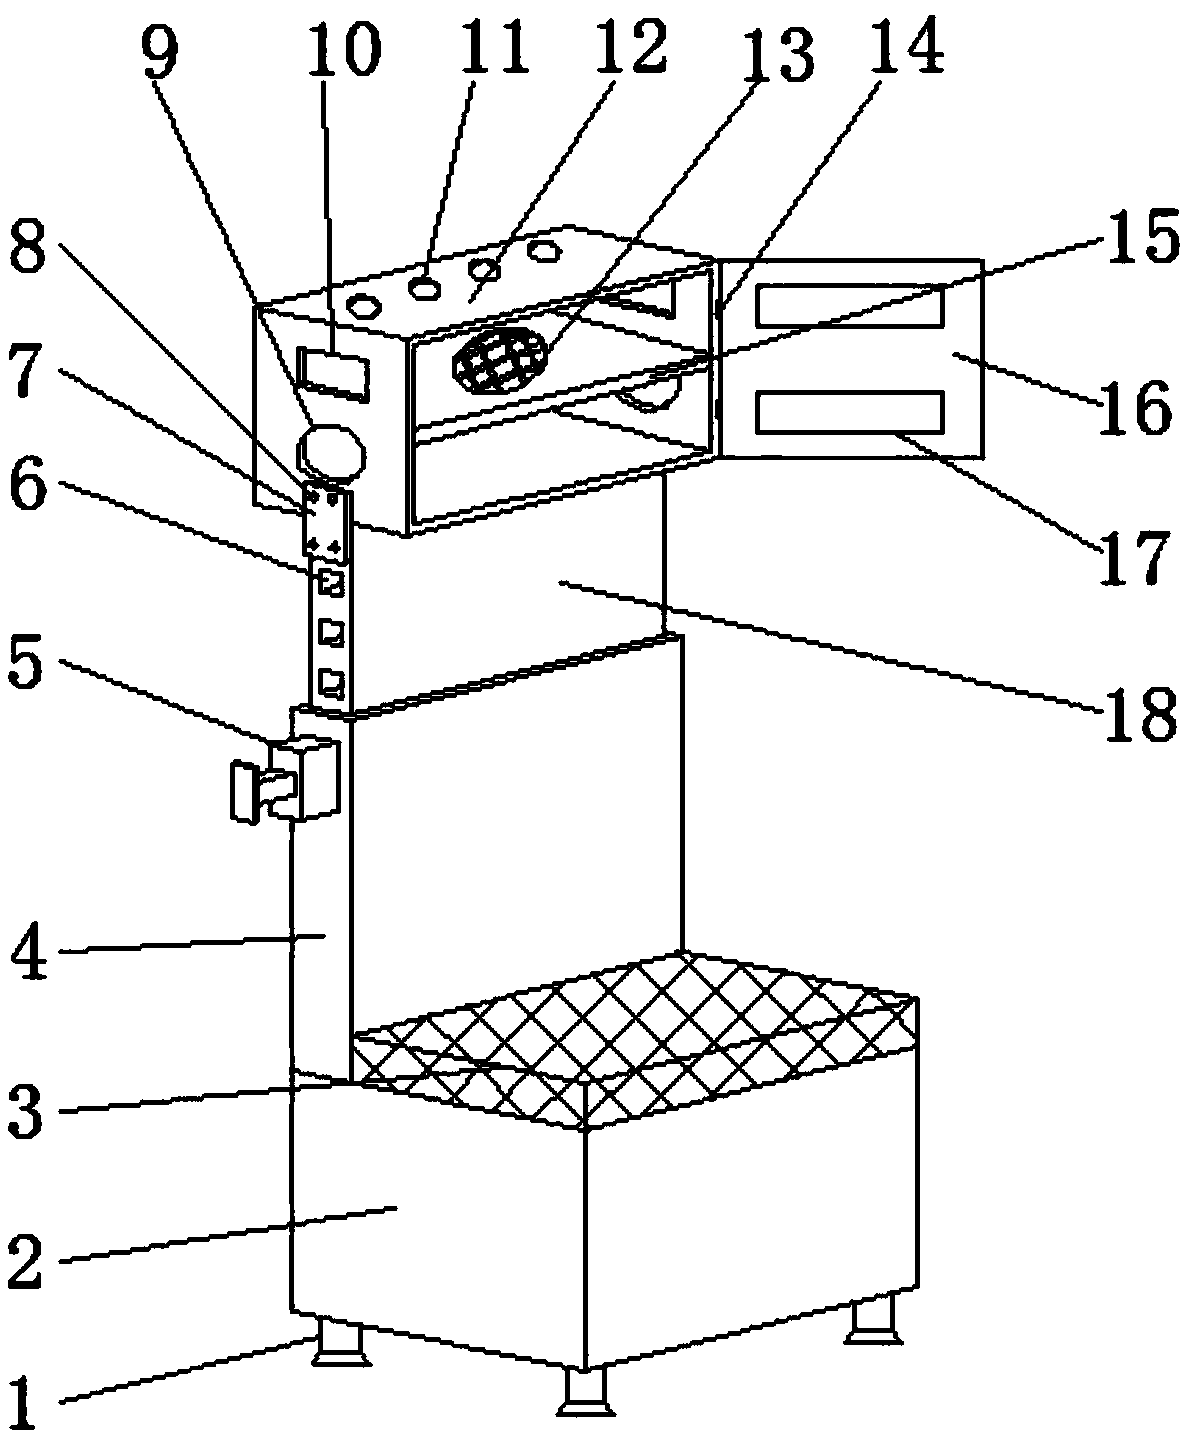 Router safety protection device and method